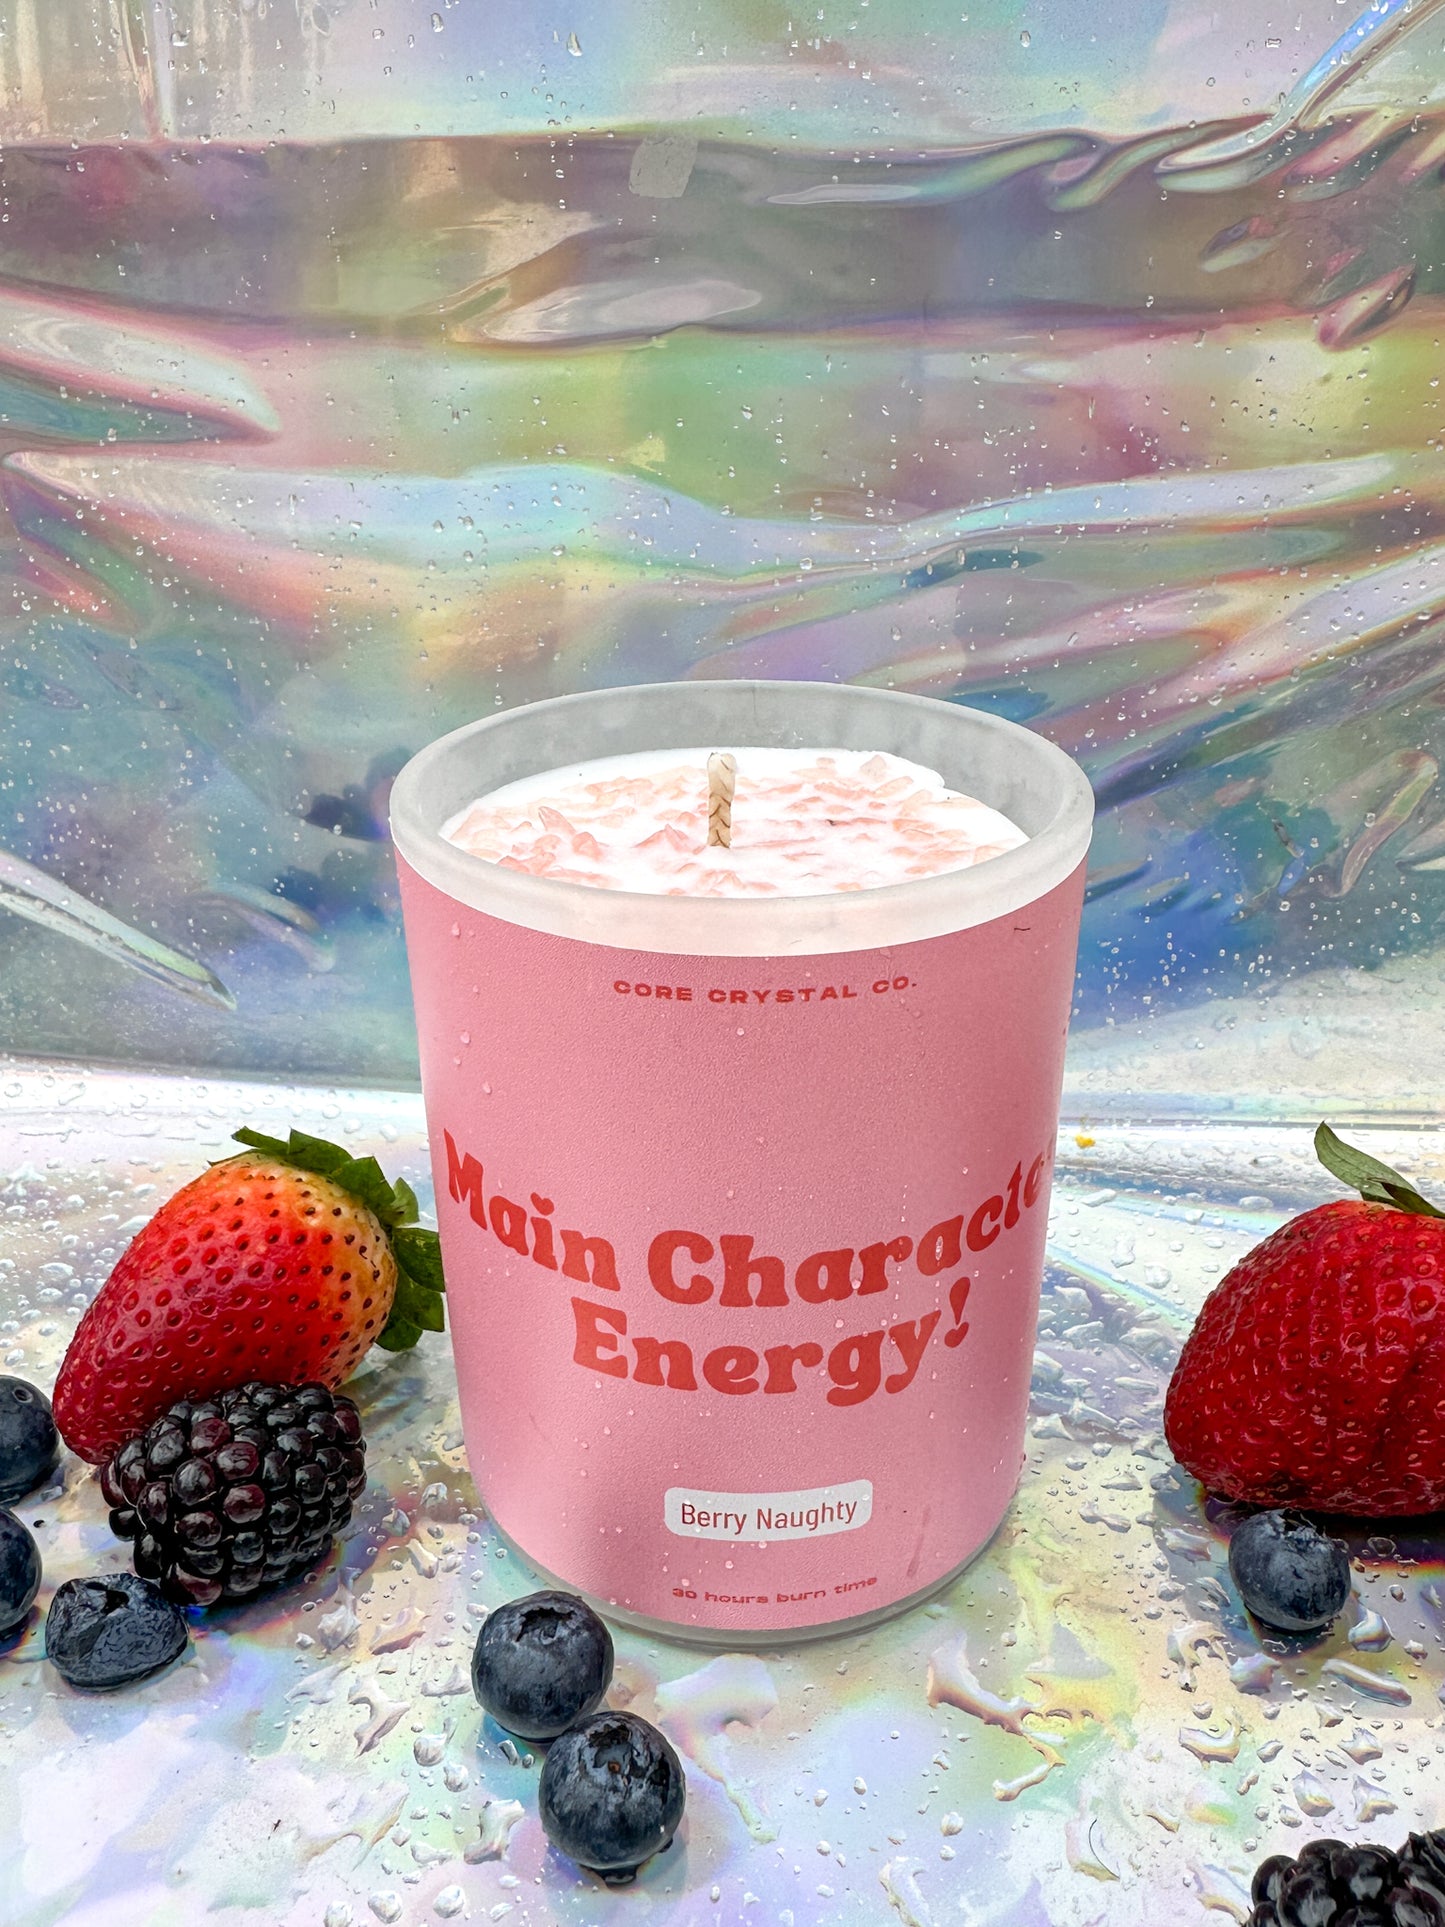 Main Character Energy - Berry Naughty Candle